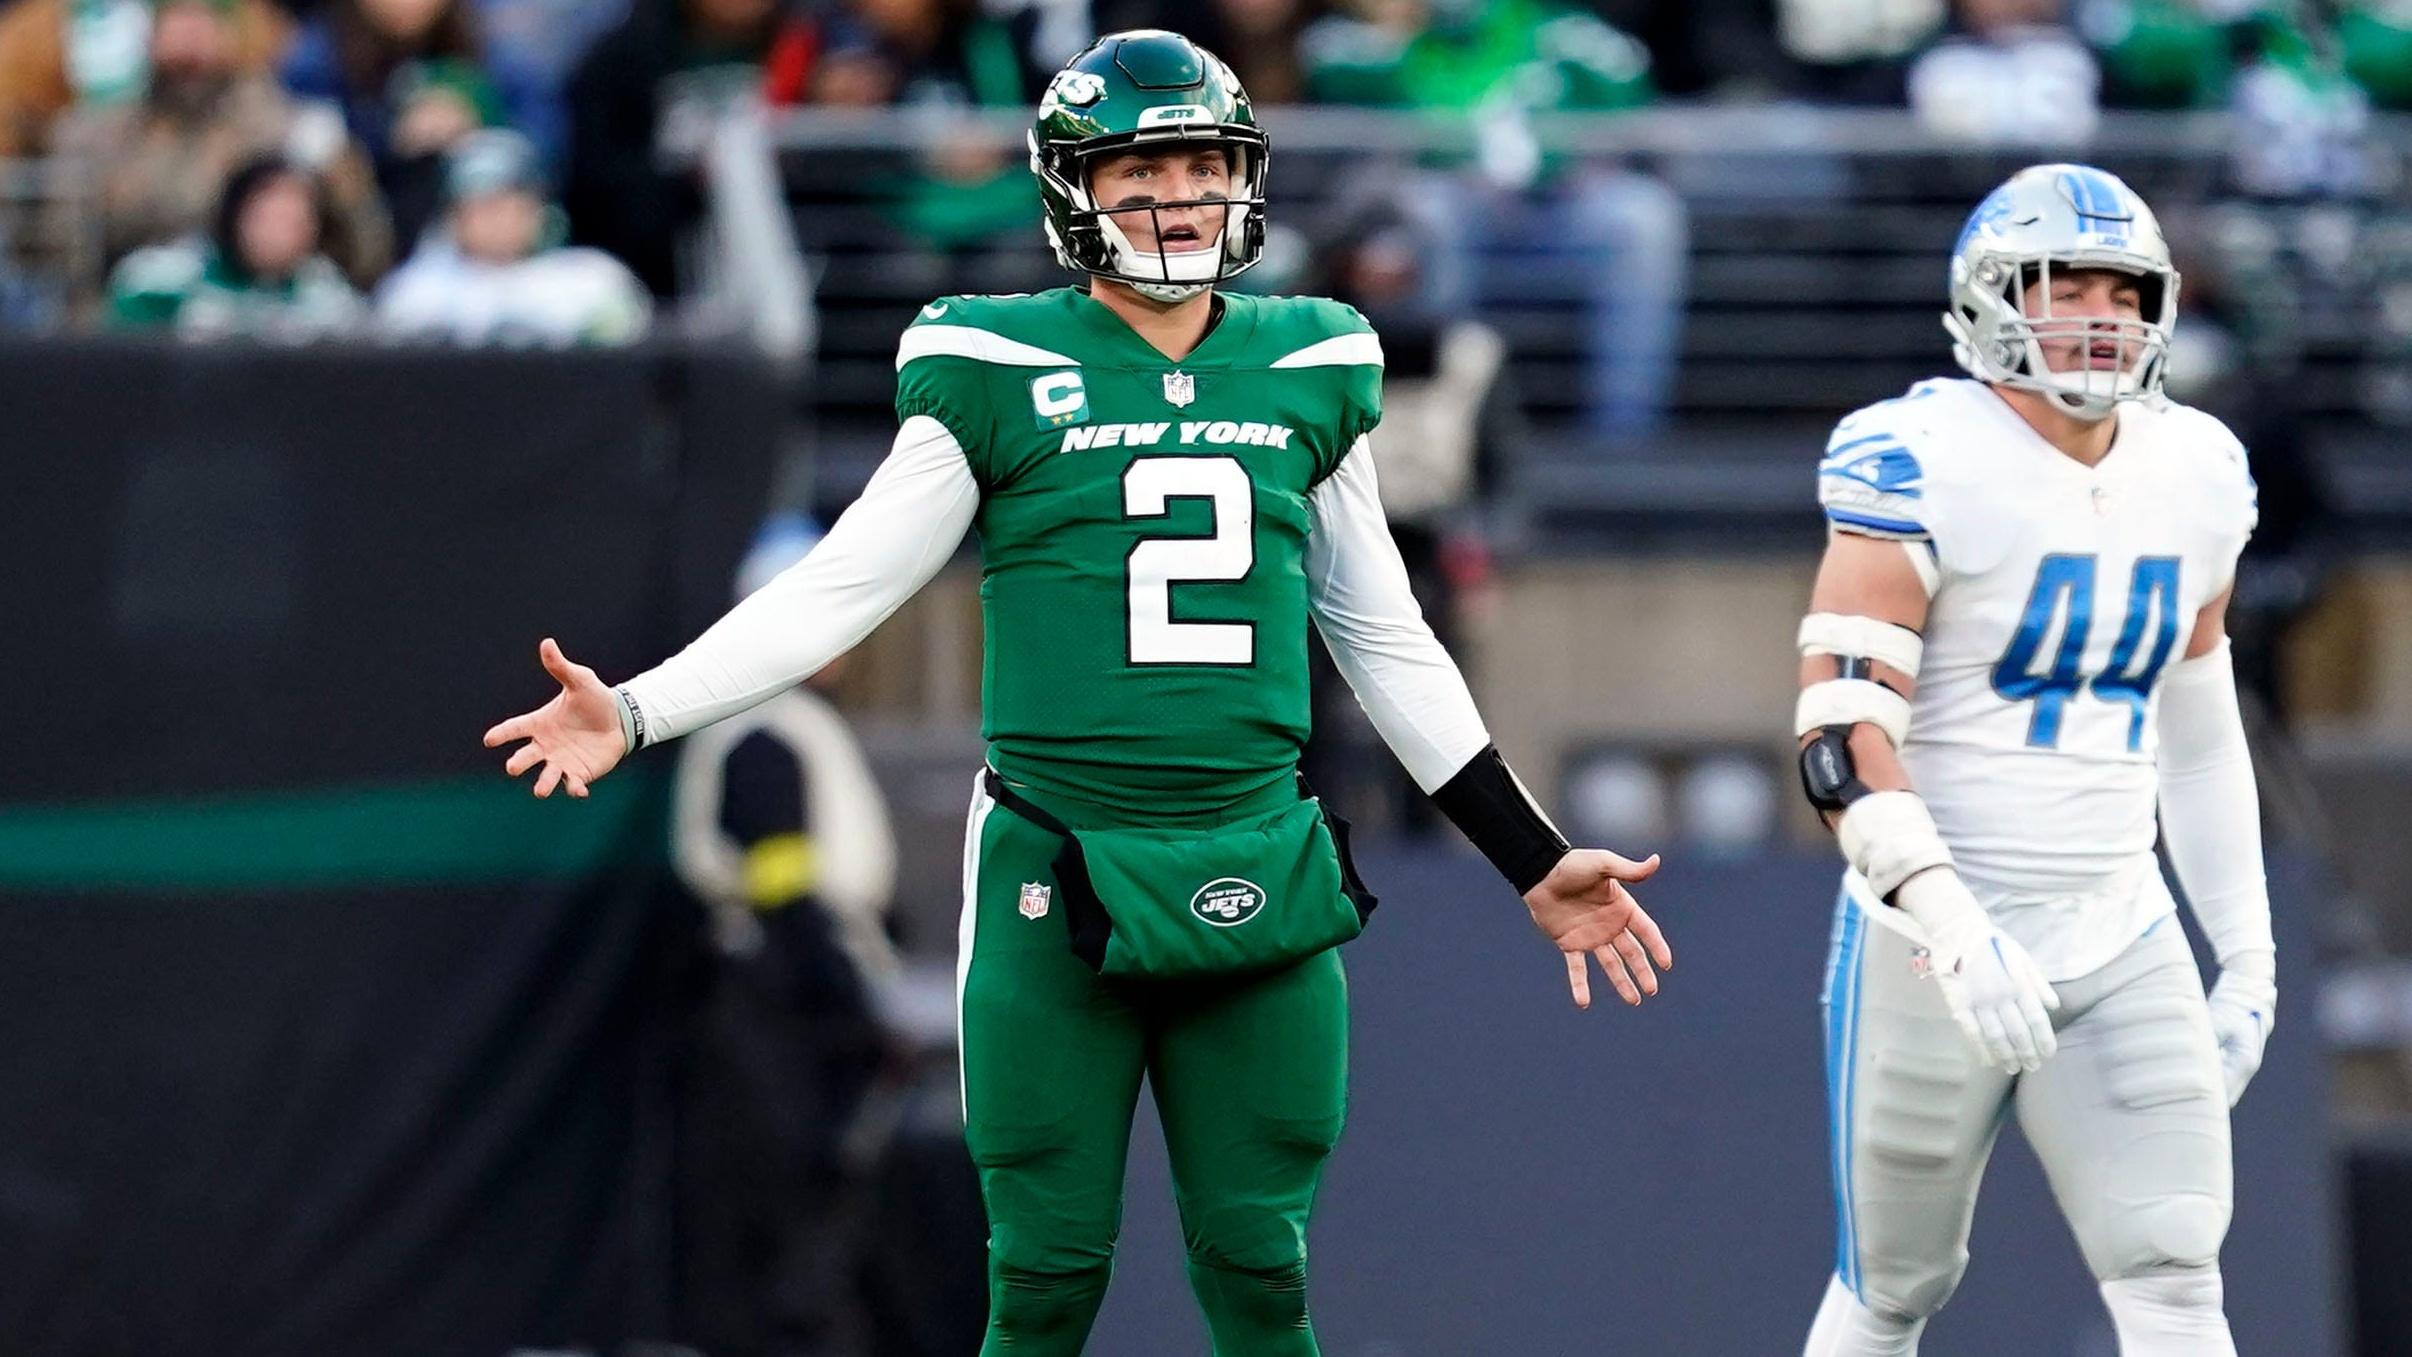 New York Jets quarterback Zach Wilson (2) reacts after failing to convert on downs in the second half. The Lions defeat the Jets, 20-17, at MetLife Stadium on Sunday, Dec. 18, 2022 / Danielle Parhizkaran - NorthJersey.com - USA TODAY NETWORK